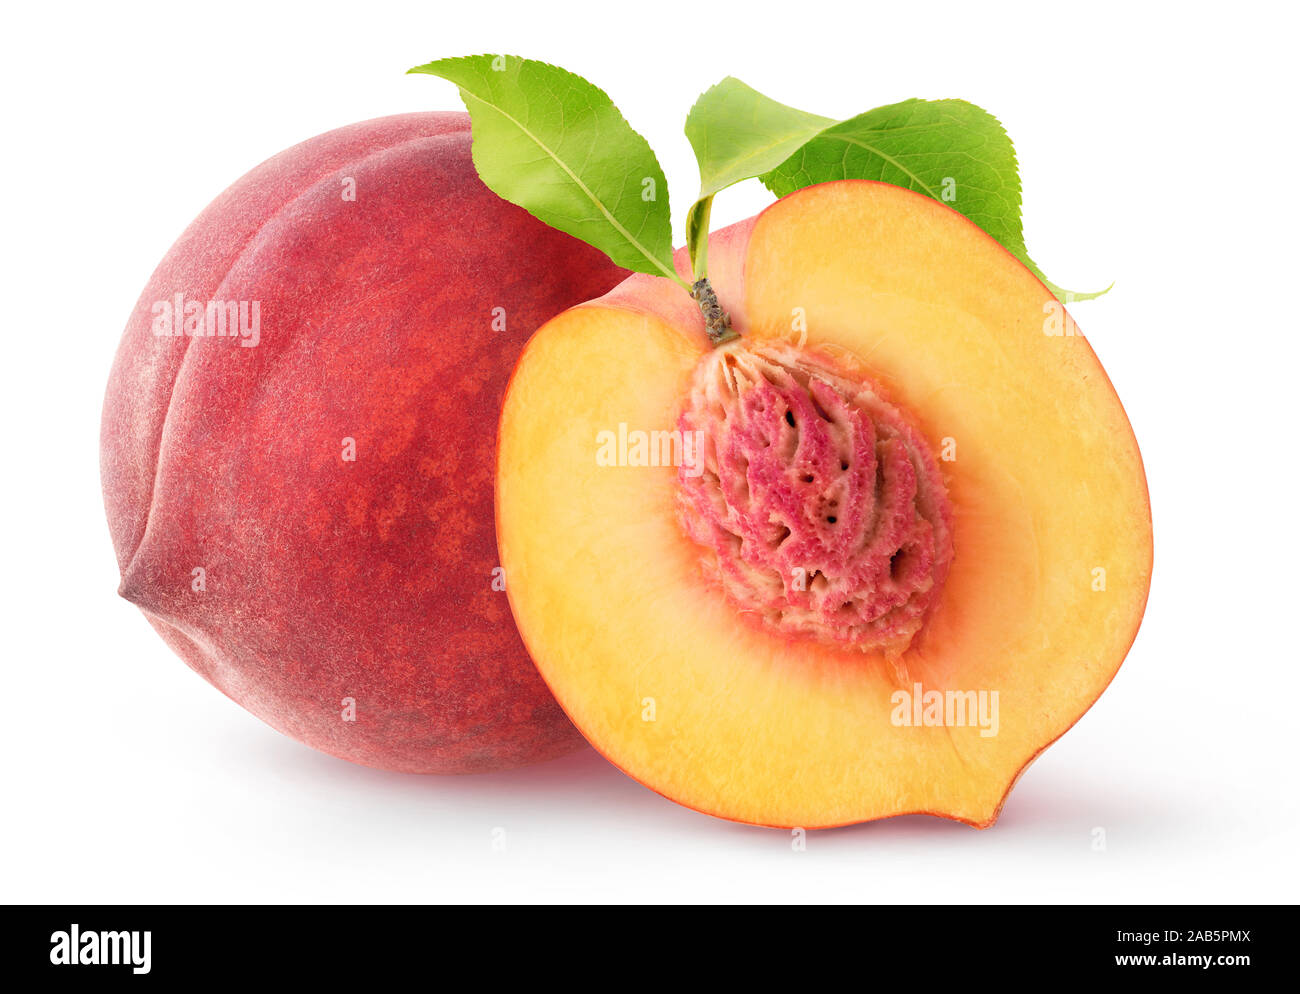 Isolated peach fruits. One whole fresh peach and a half with kernel and leaves isolated on white background with clipping path Stock Photo